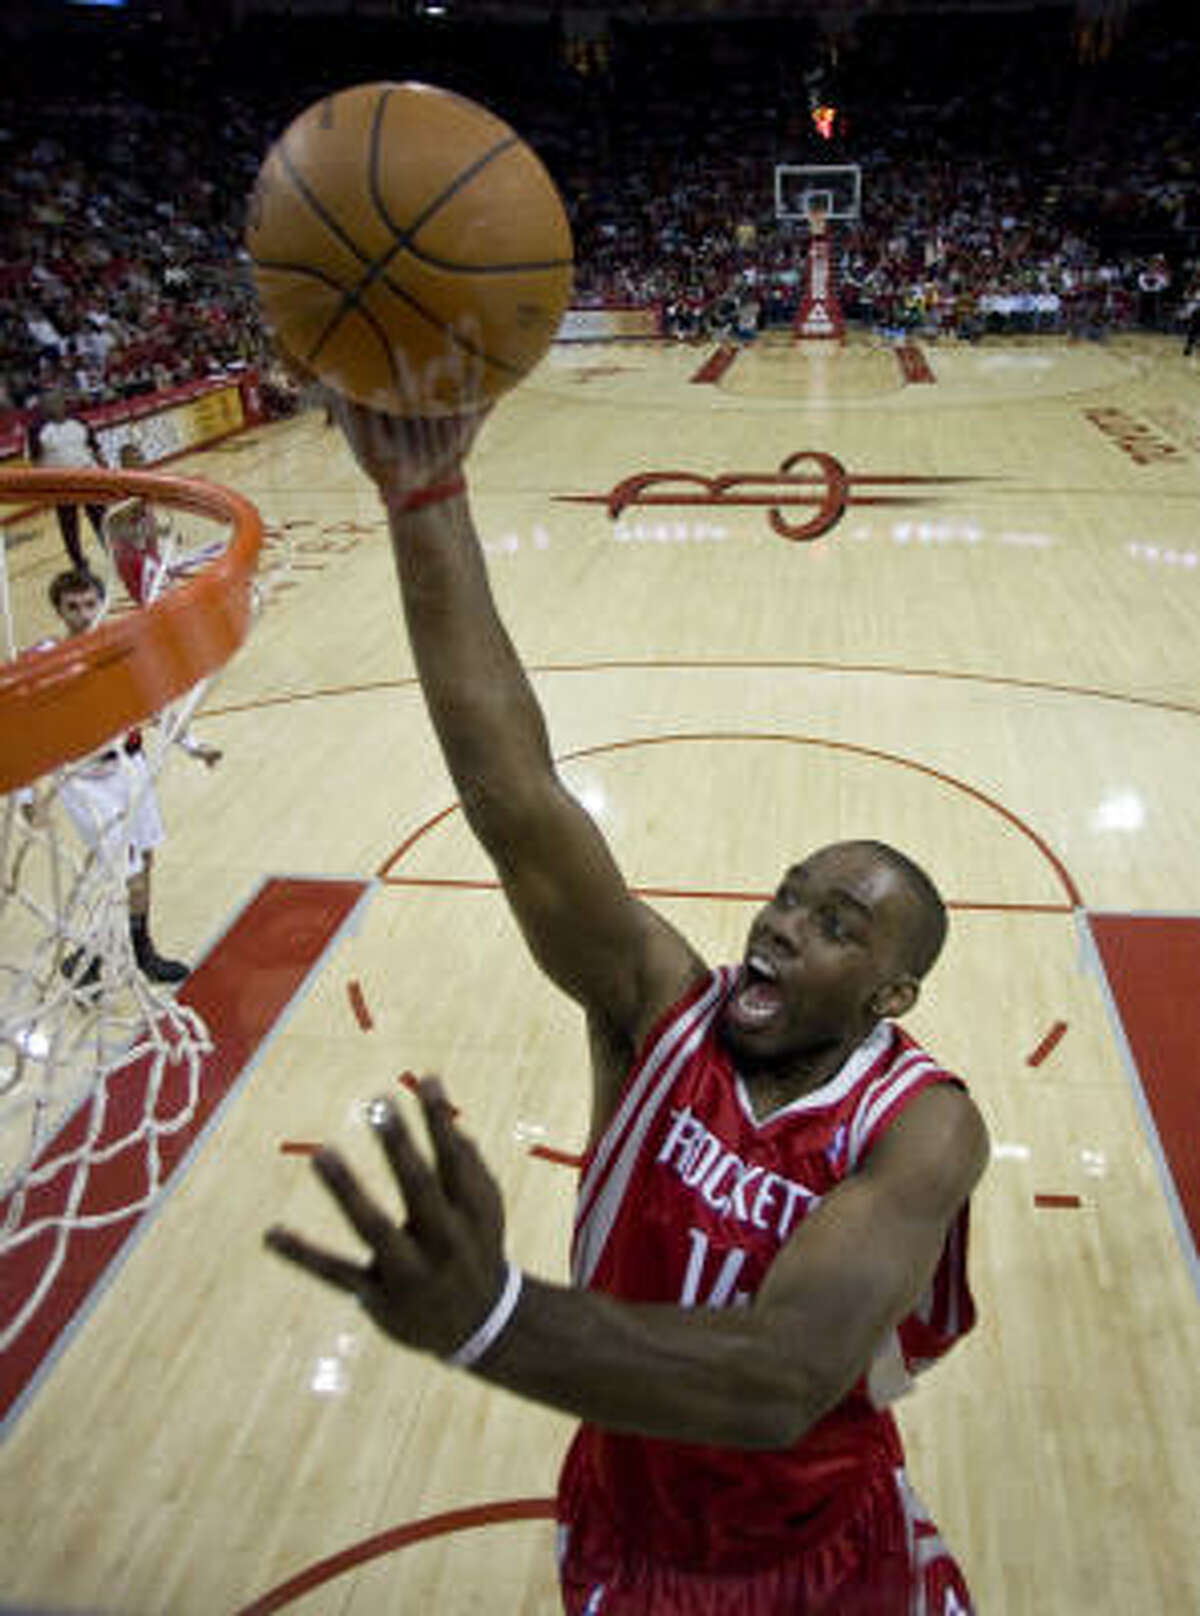 The Rockets will need Carl Landry to play on the road as he has on home.